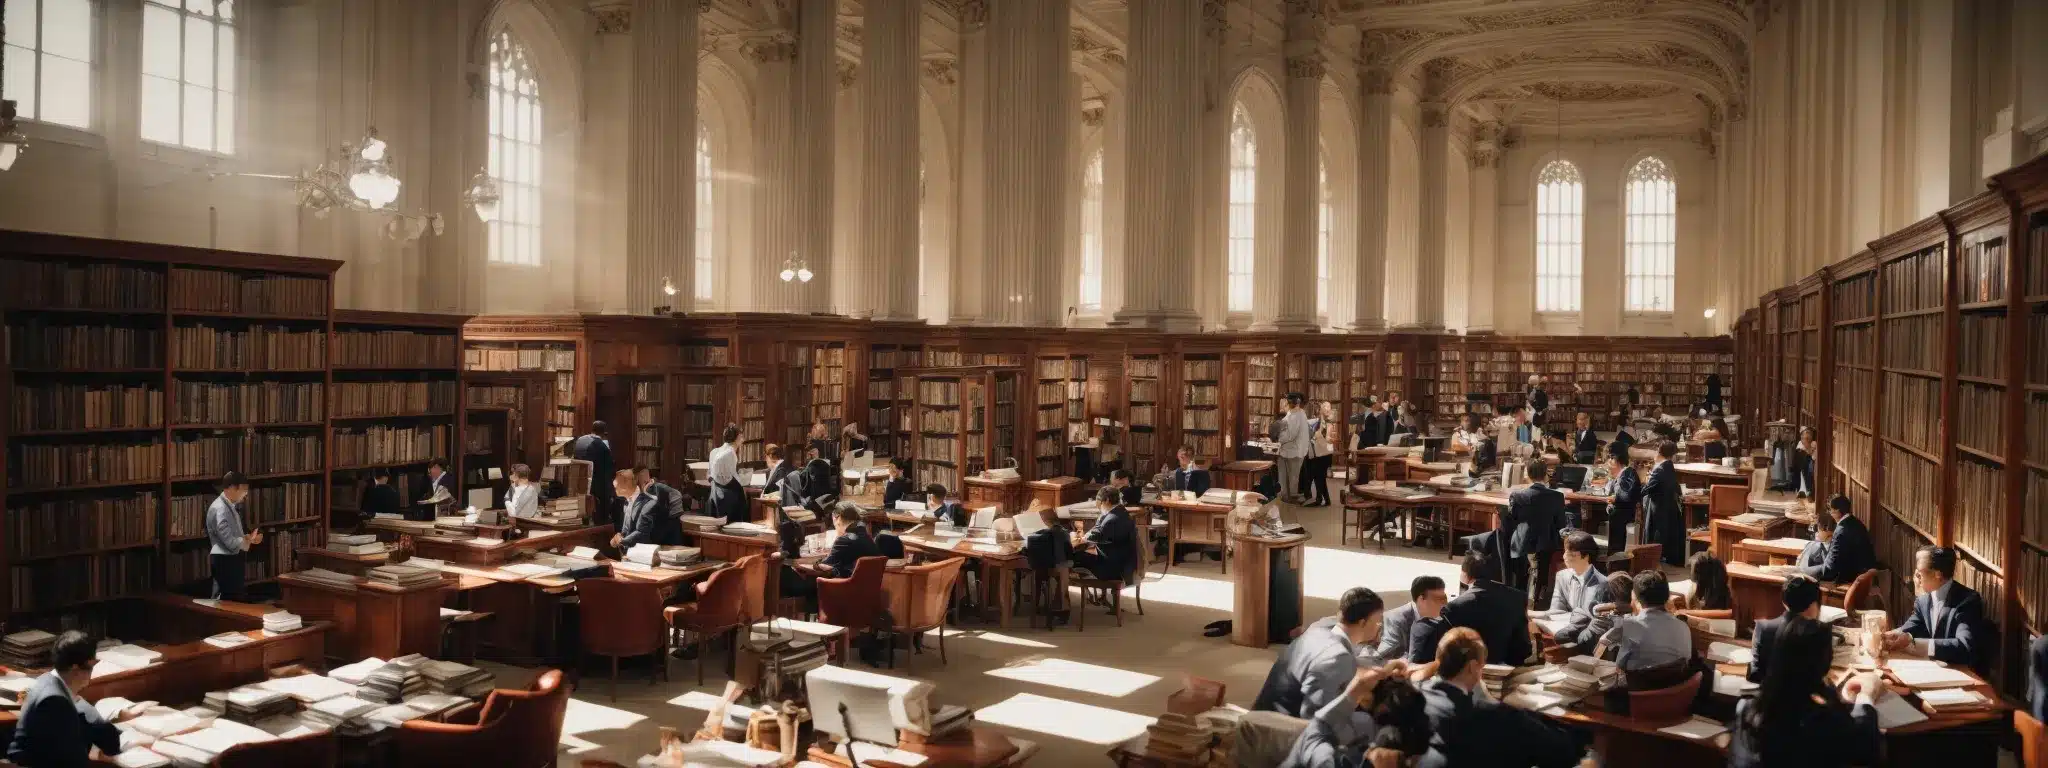 A Bustling Library Filled With Business Books And Marketers Engaged In Intense Discussion.